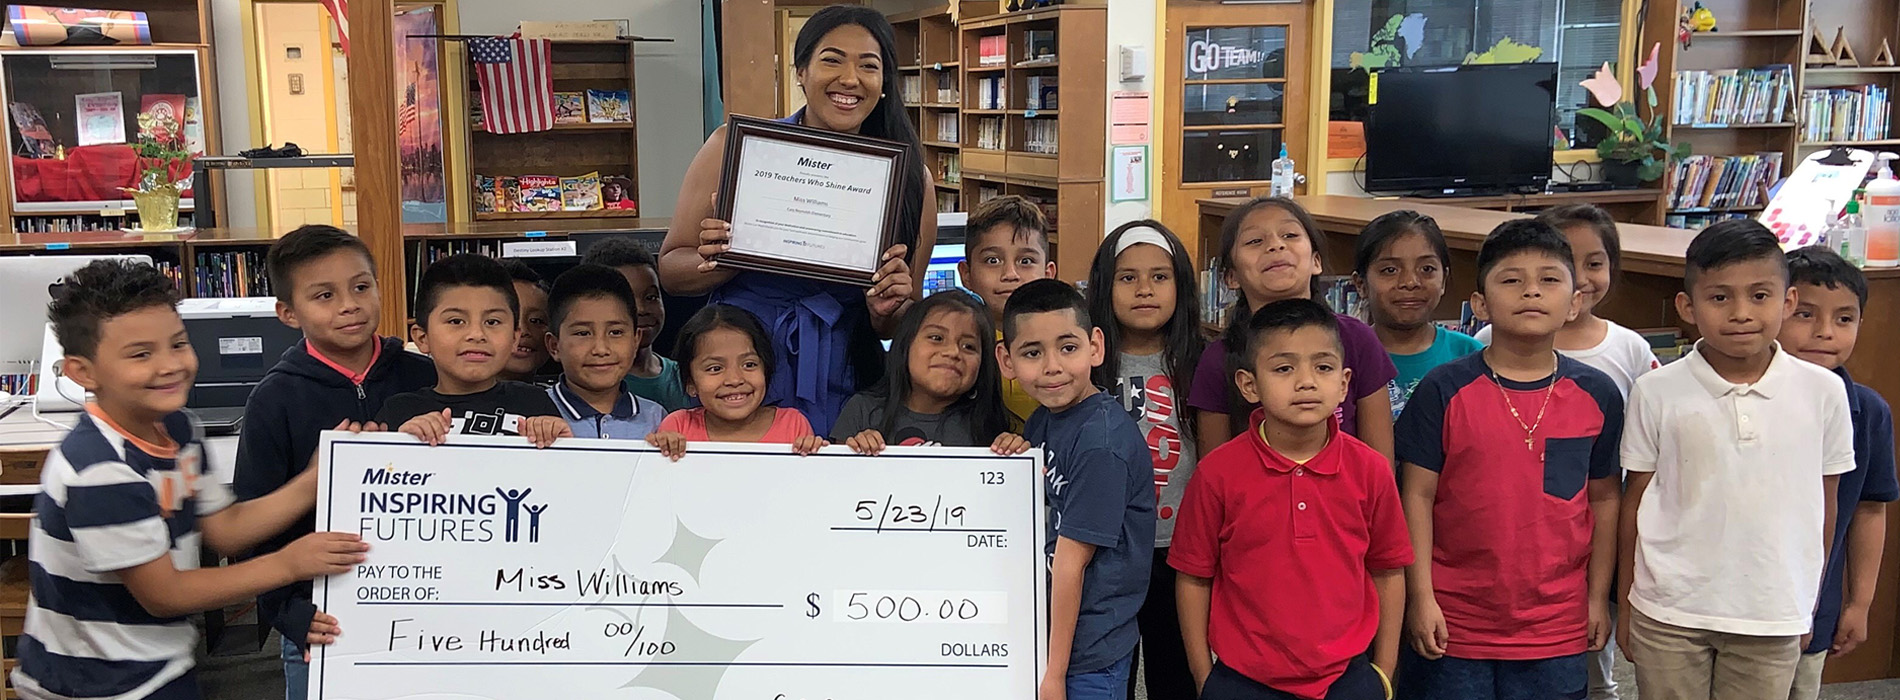 Teachers and children holding up a giant check